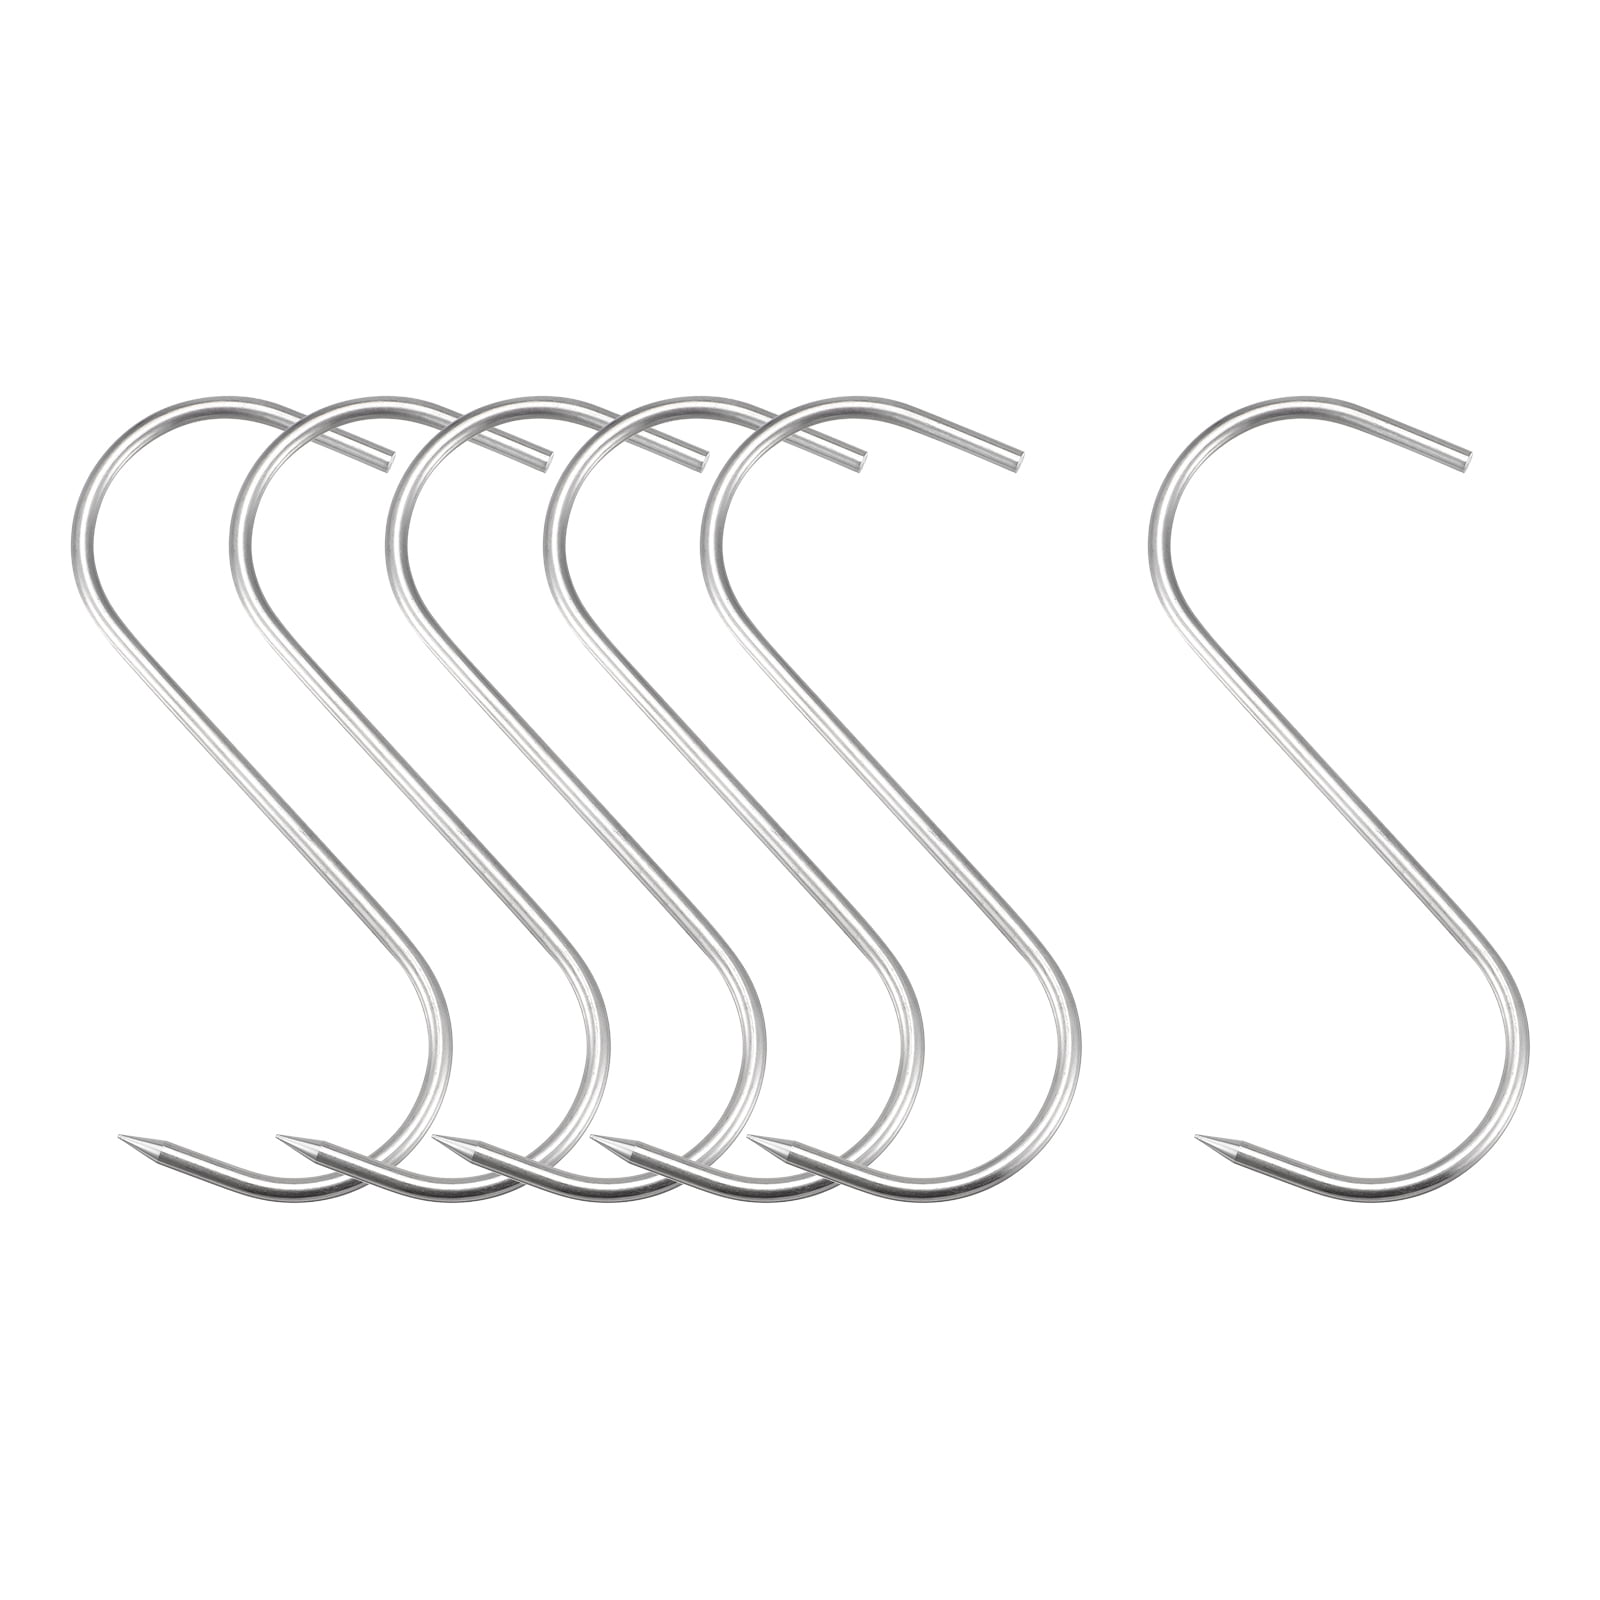 Uxcell 9.84 Meat Hooks, 0.39 Thick Stainless Steel S-Hook, Meat